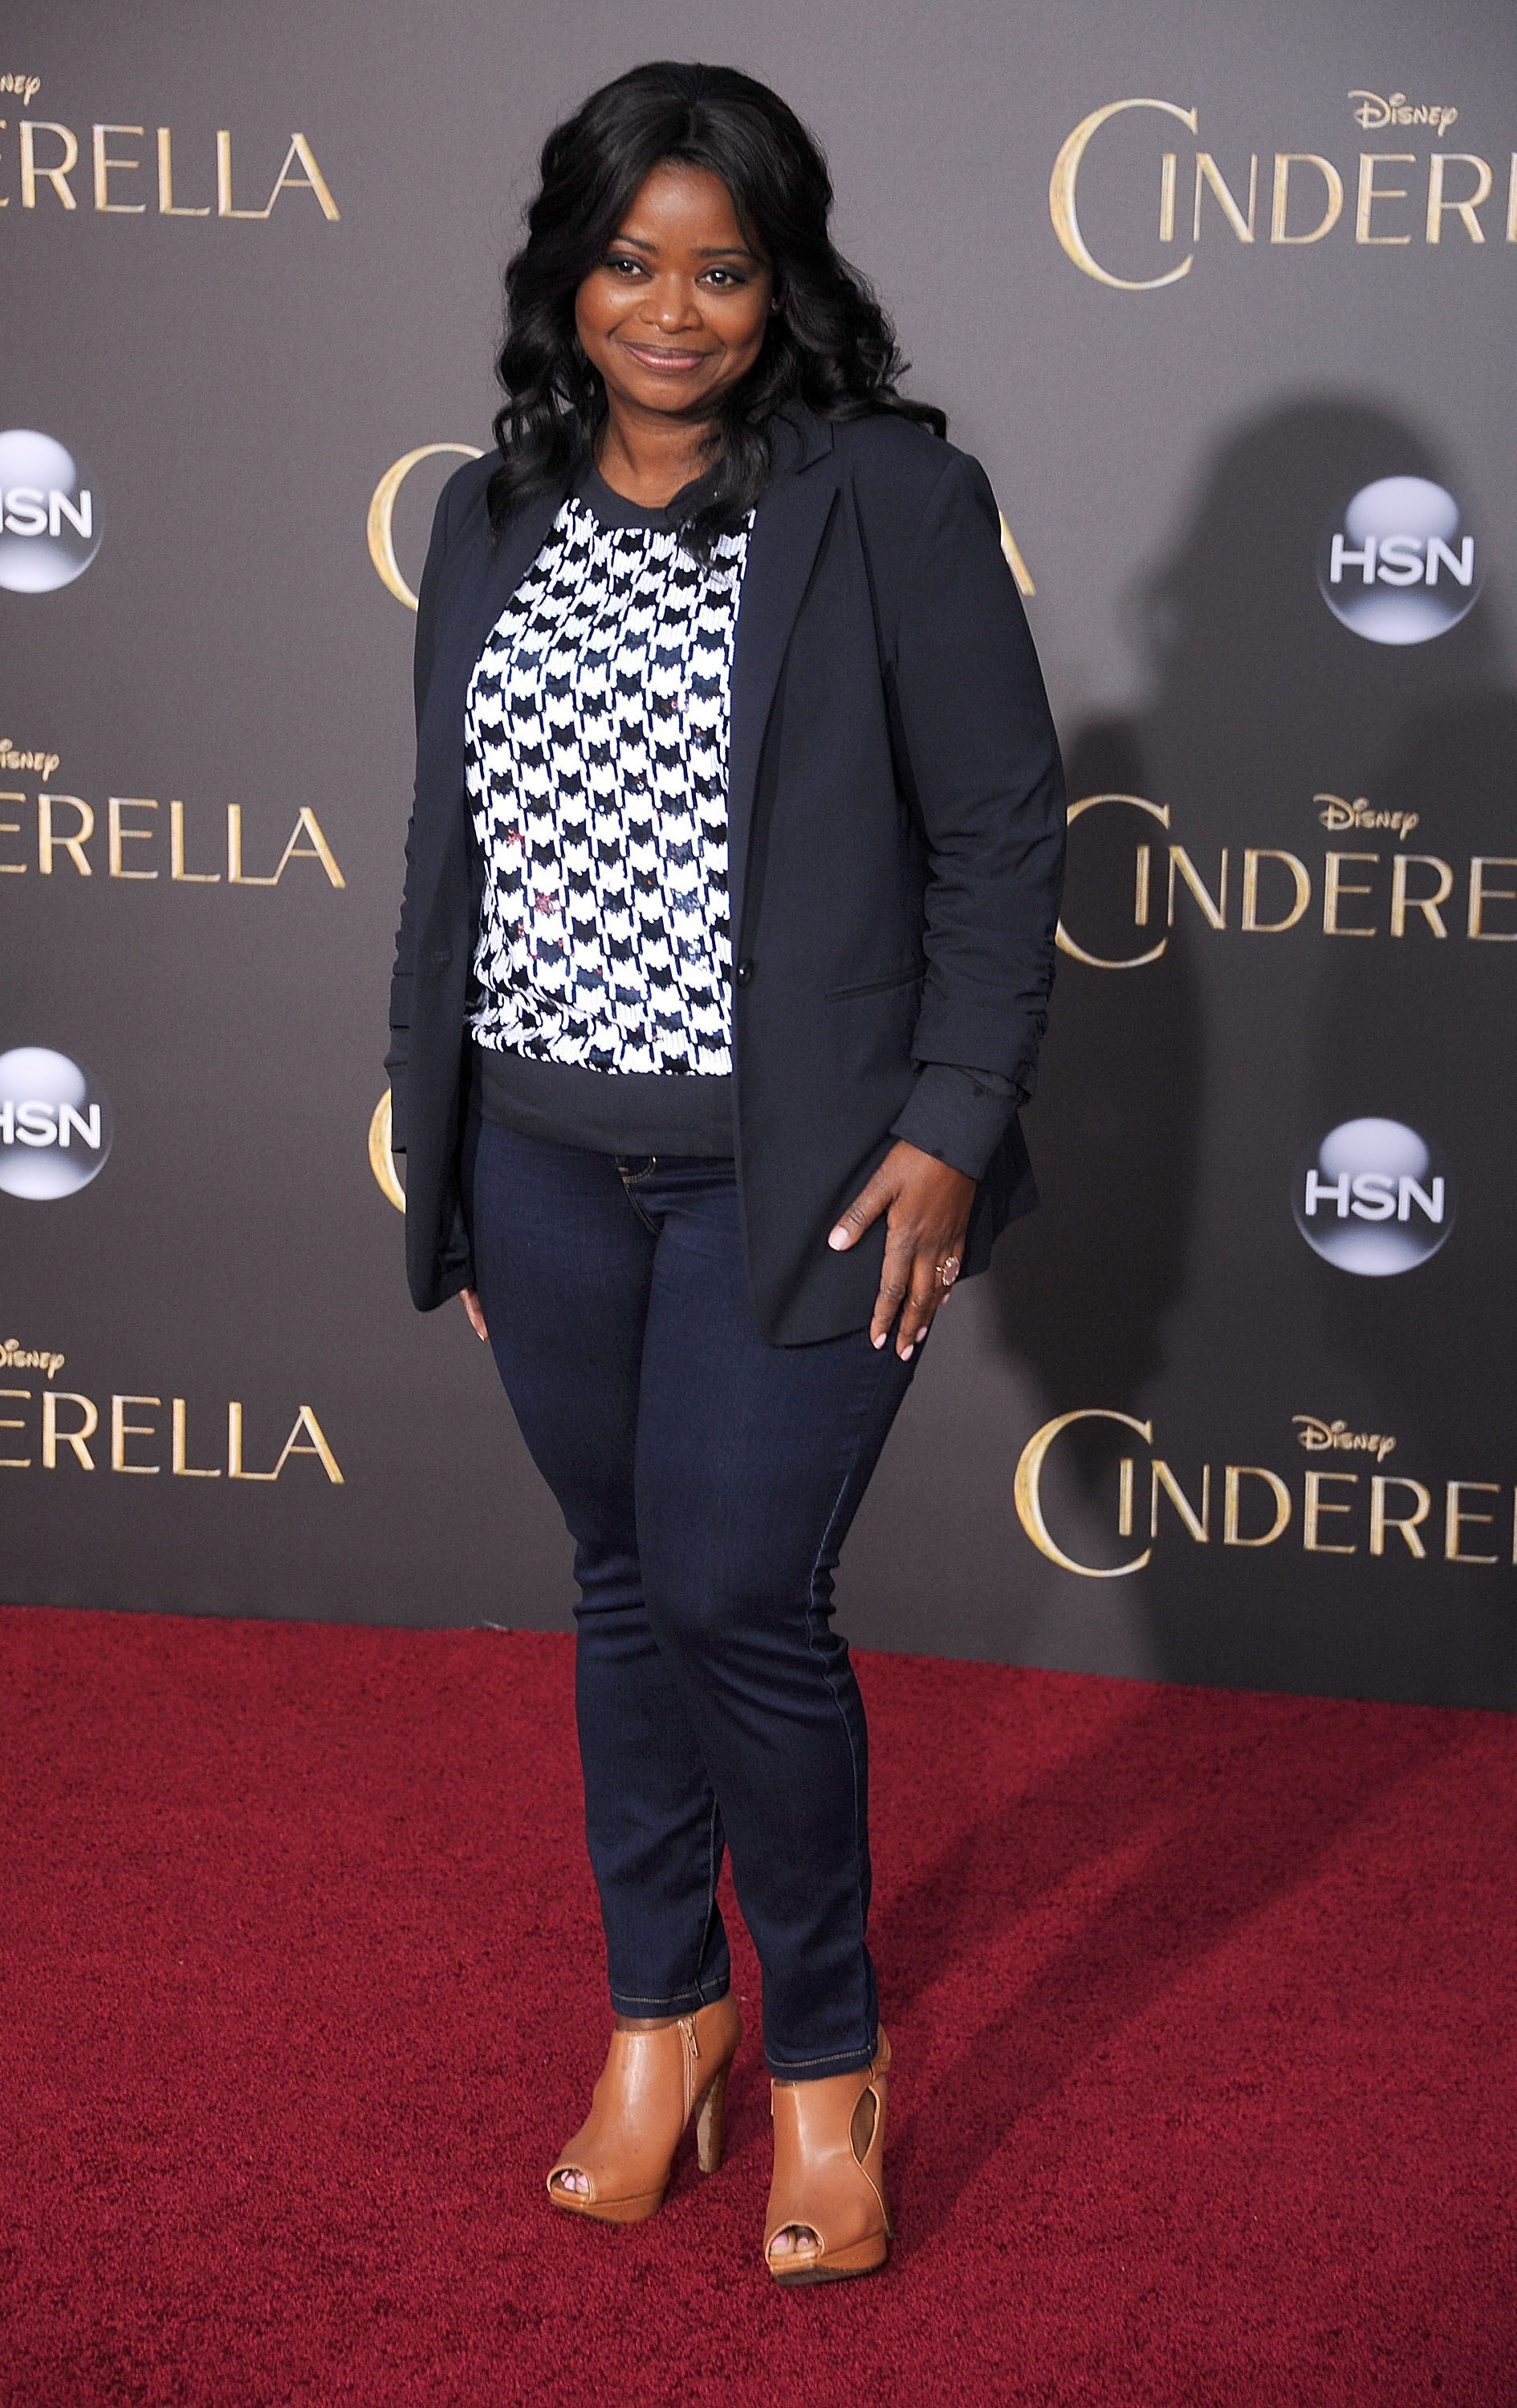 Octavia Spencer arrives at the World Premiere of Disney's "Cinderella" at the El Capitan Theatre on March 1, 2015 in Hollywood.